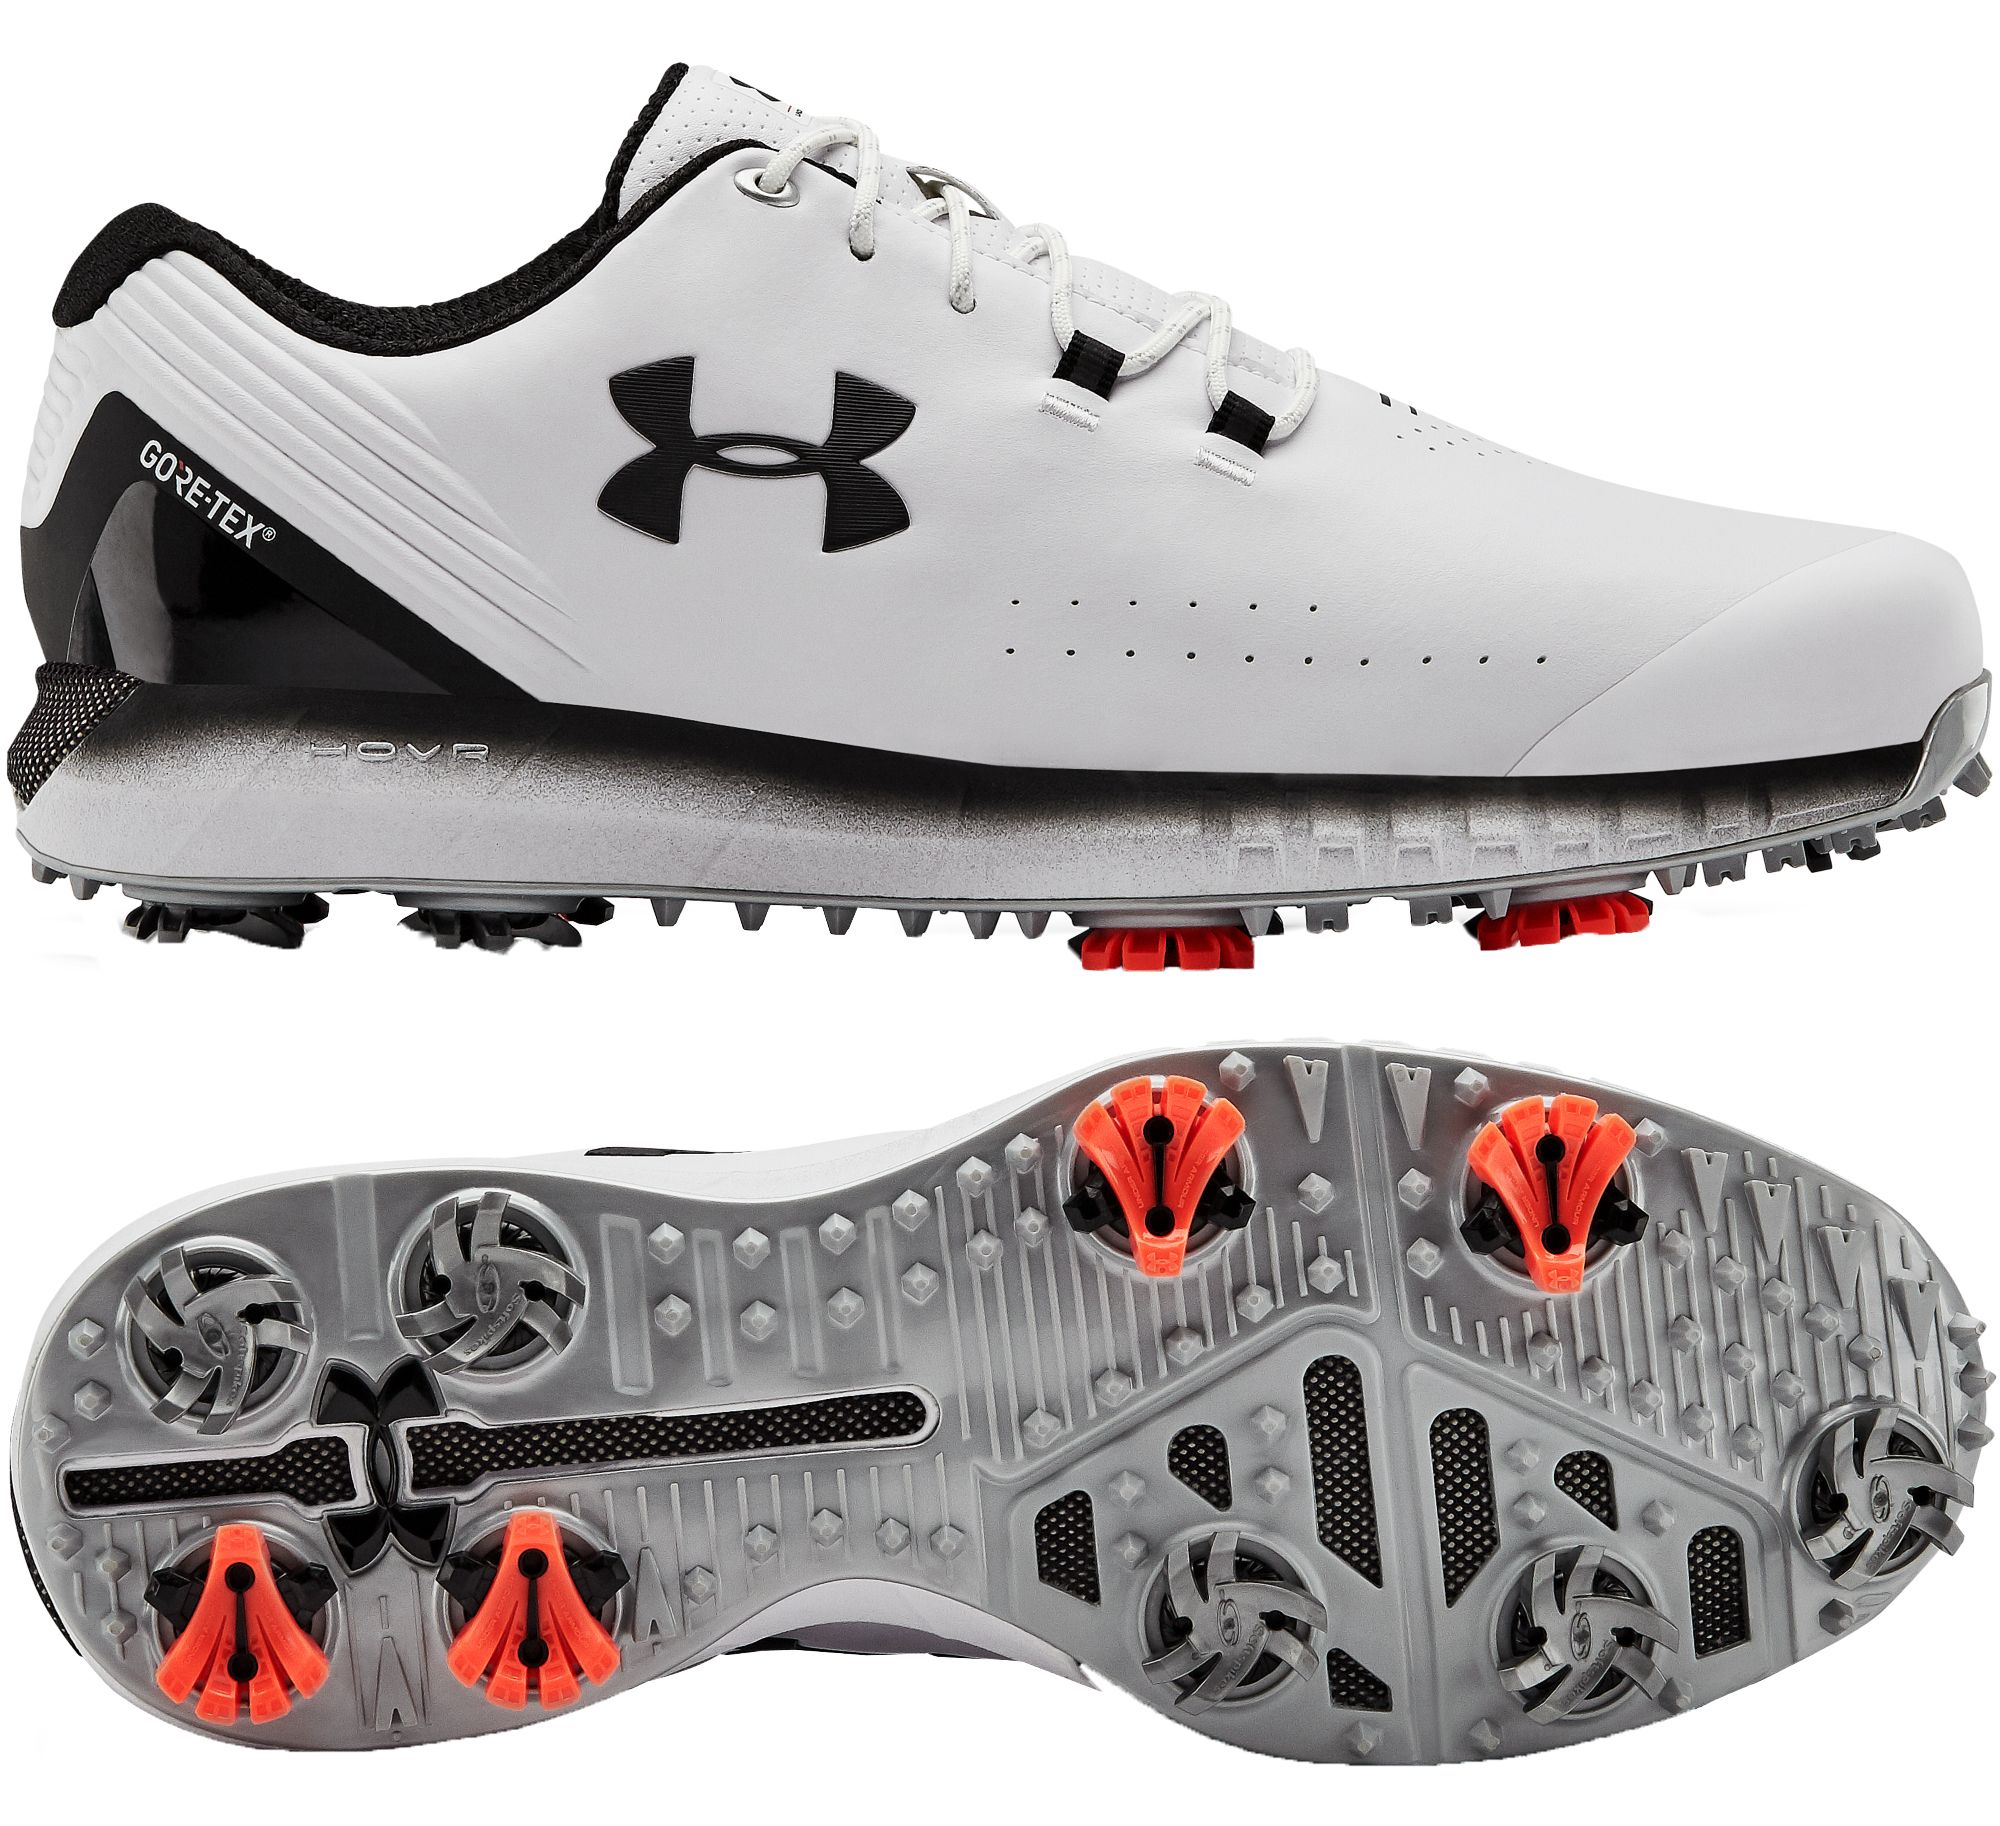 under armour gore tex golf shoes